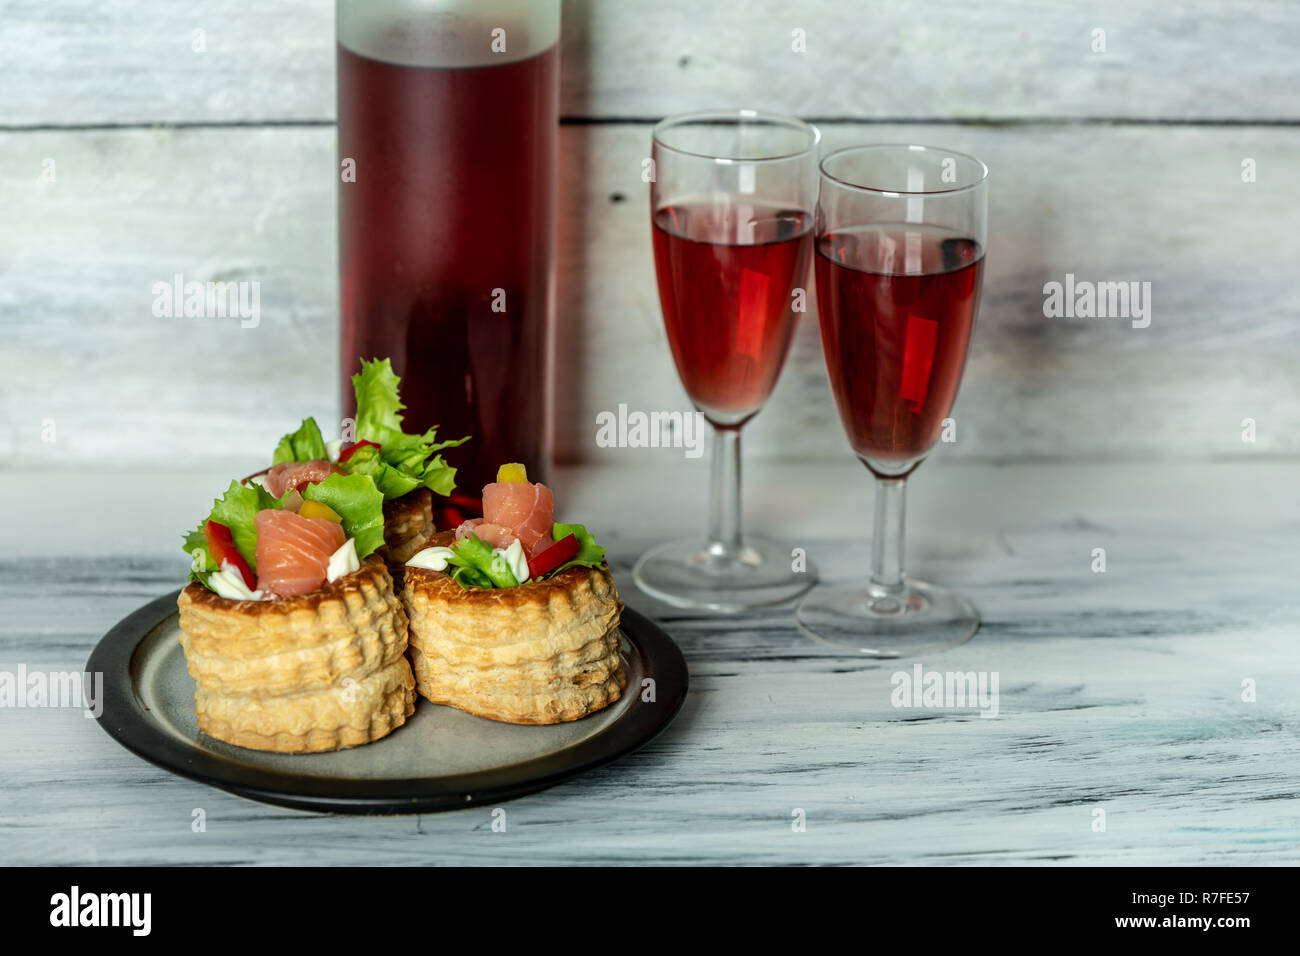 French cuisine, crunchy patties with lettuce and smoked salmon on a bright, rustic background, next to a glass of red wine Stock Photo